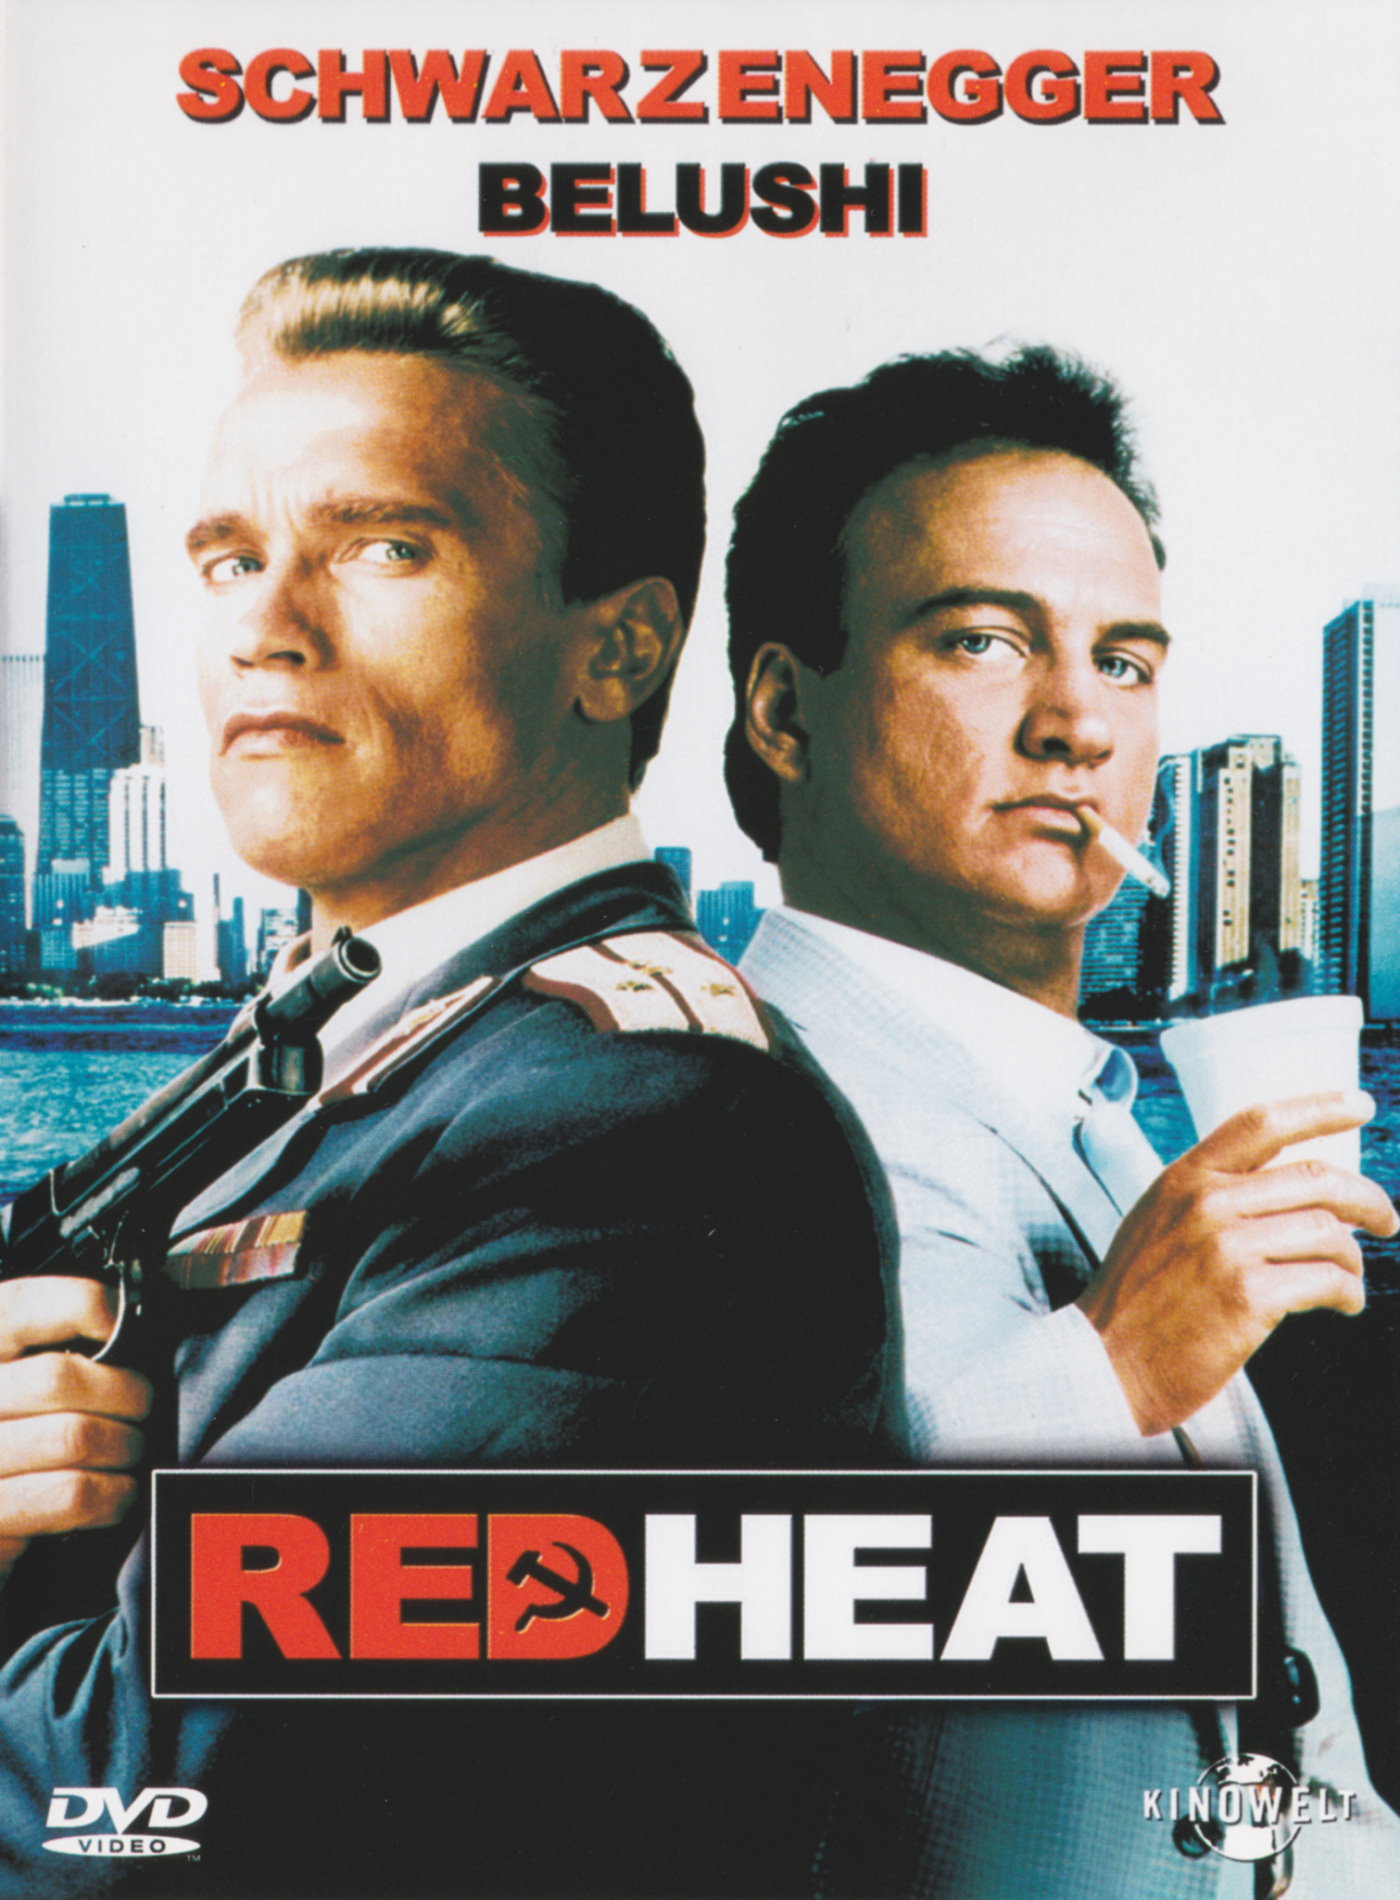 Cover - Red Heat.jpg